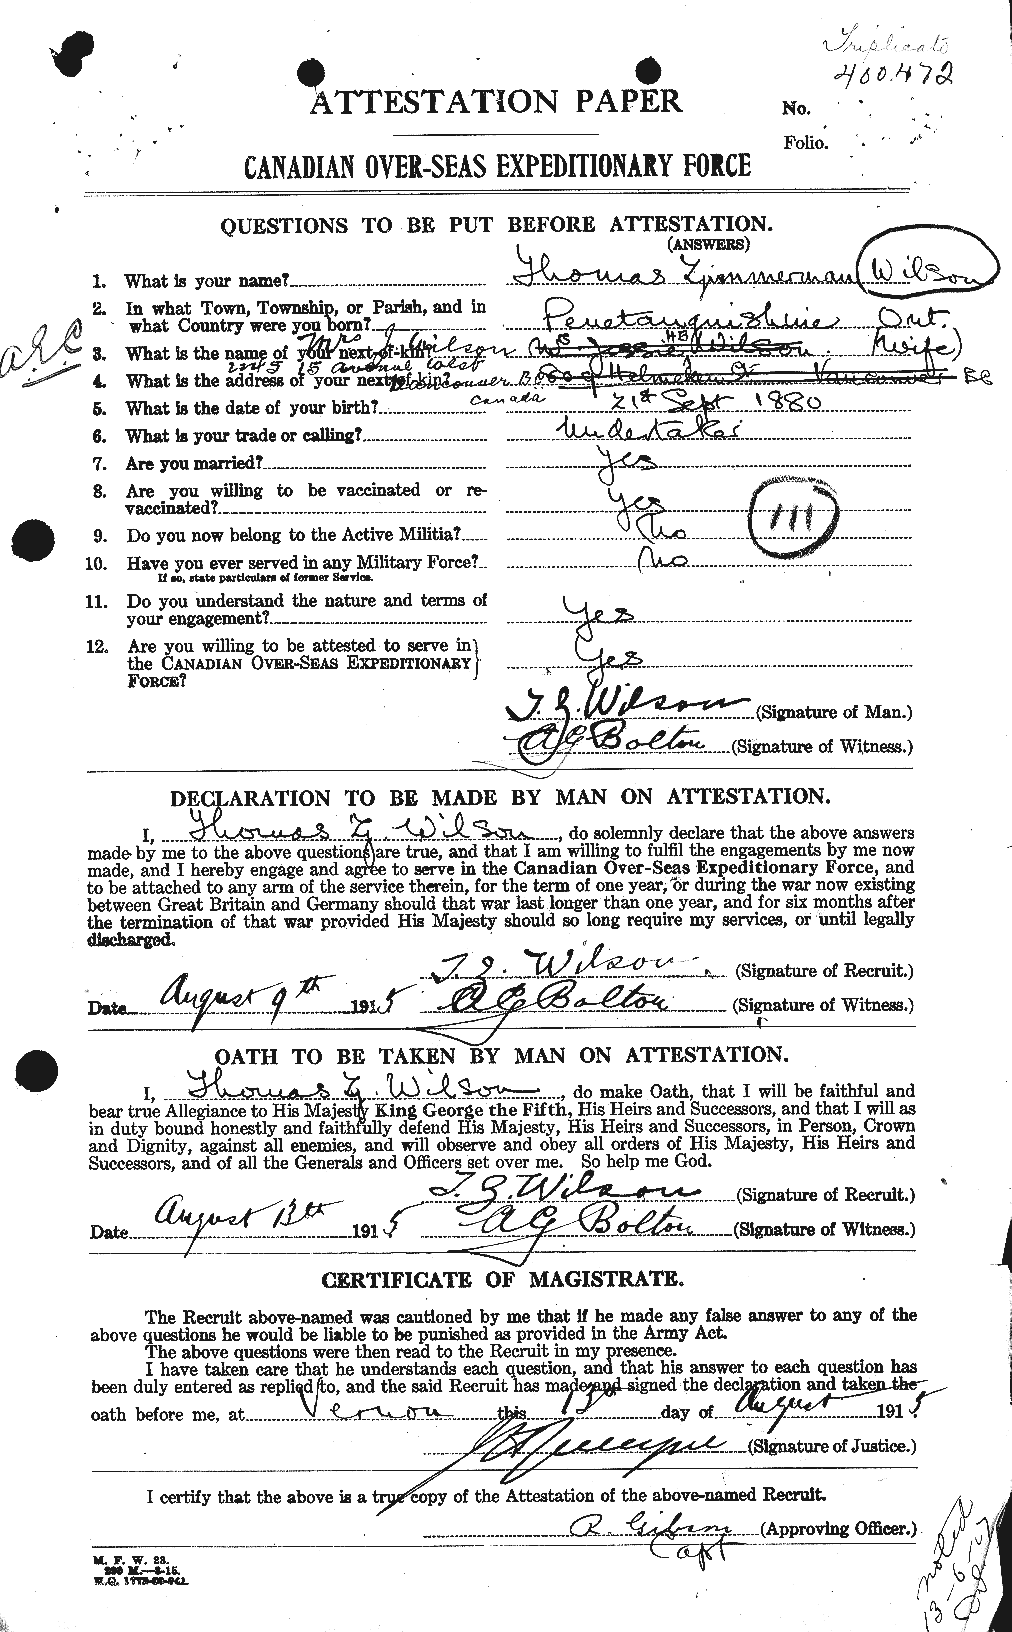 Personnel Records of the First World War - CEF 681700a